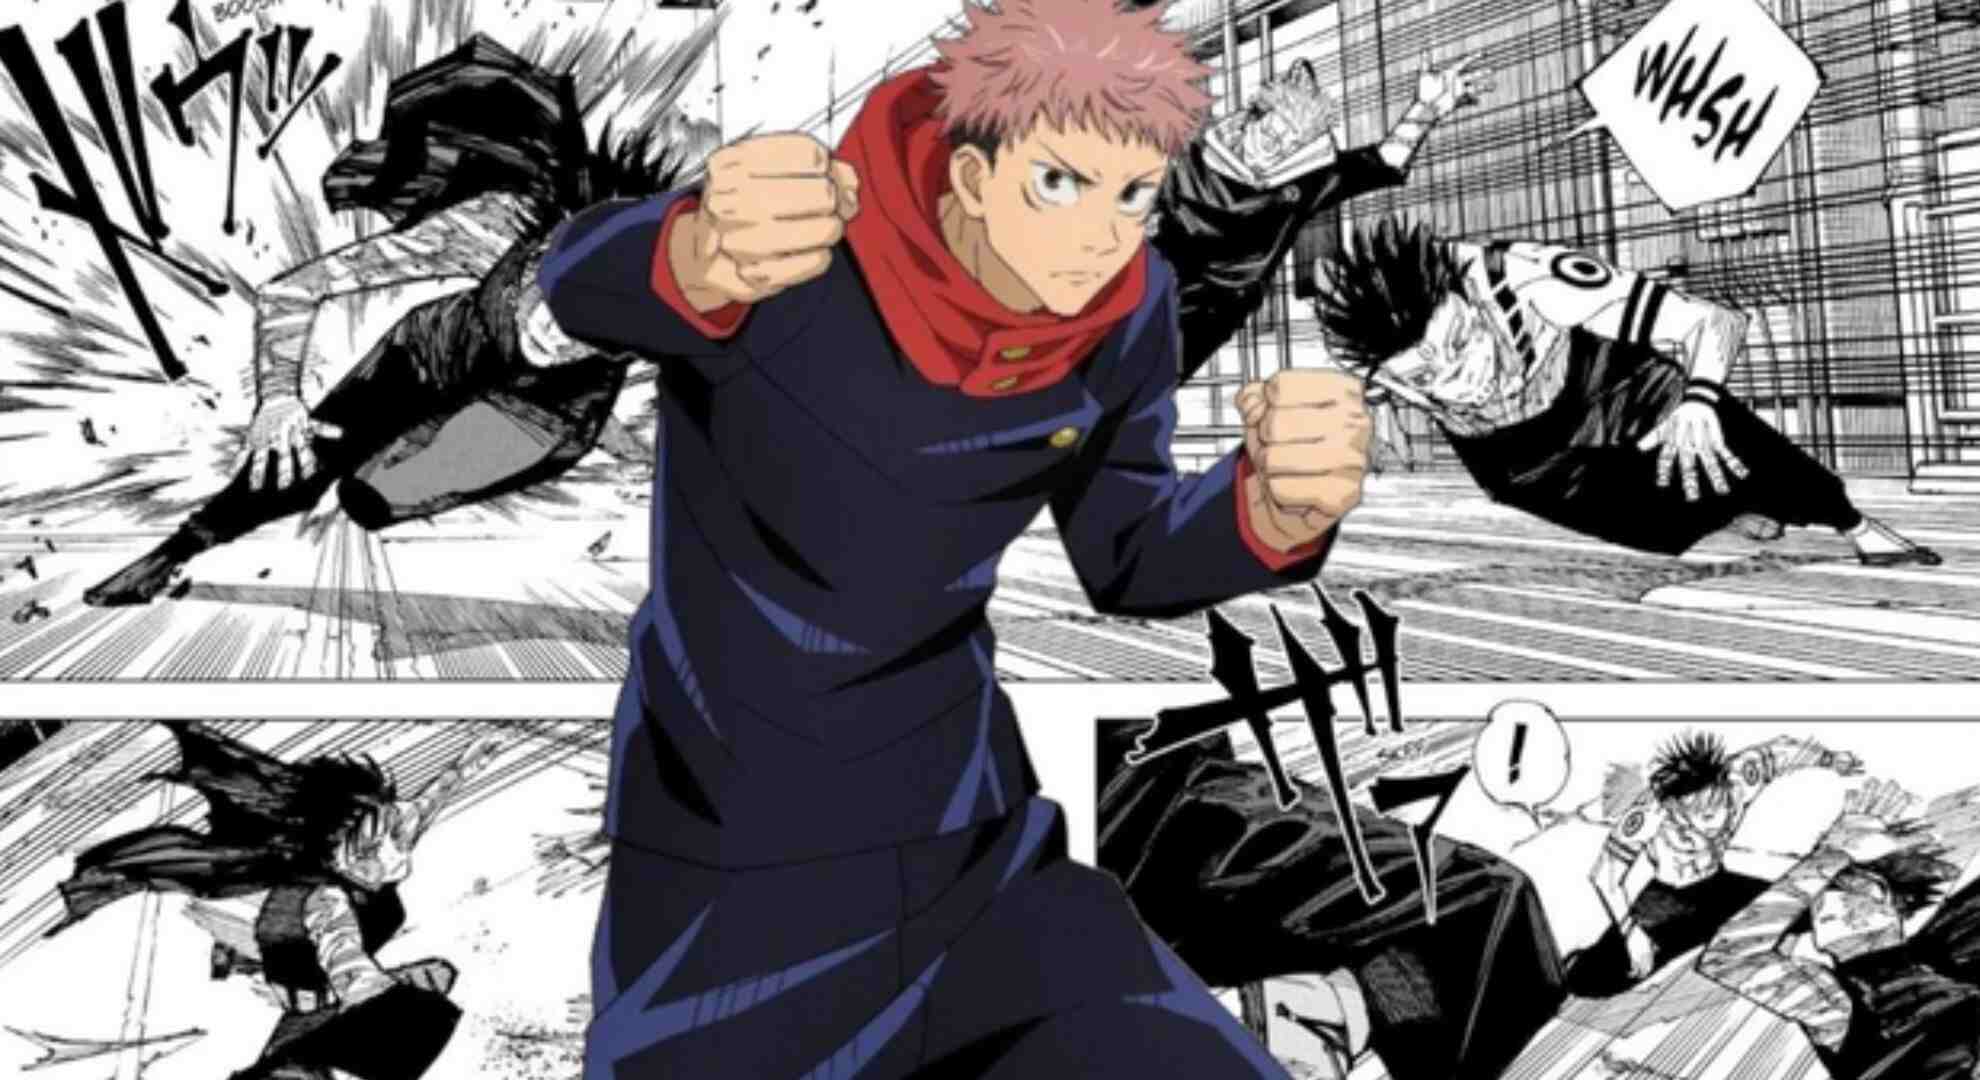 Jujutsu Kaisen Chapter 217 Release Date And Spoilers The News Fetcher